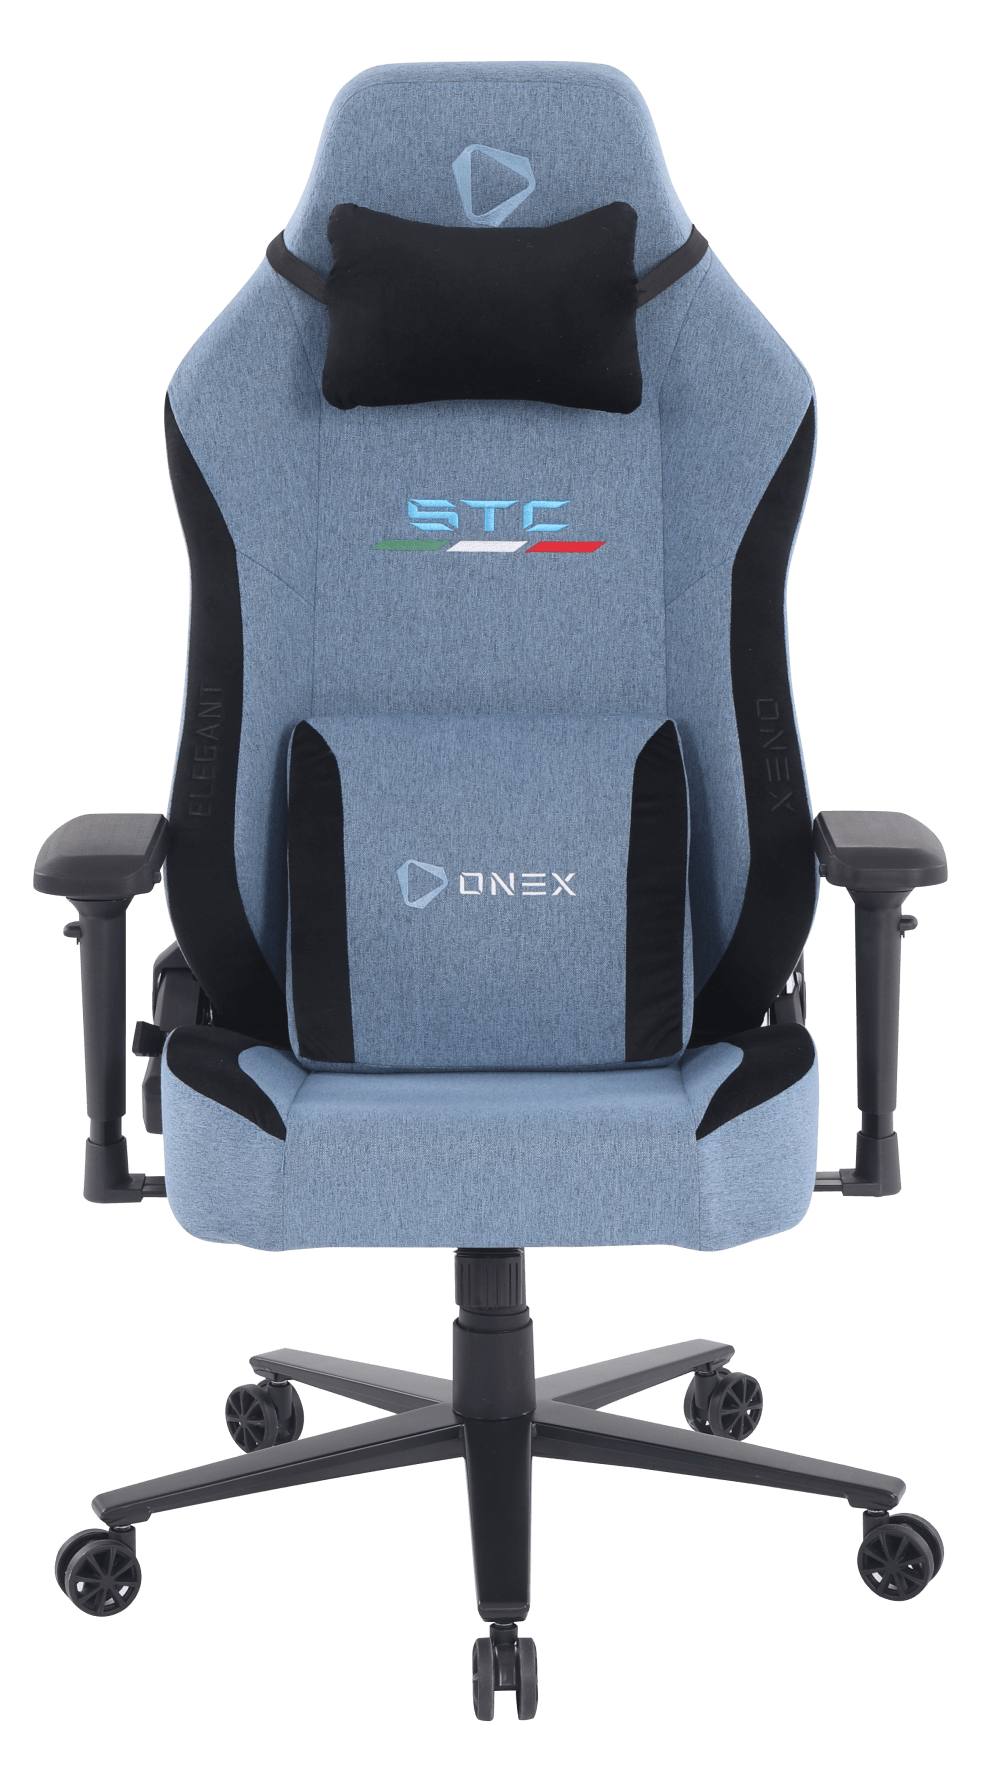  ONEX-STC ELEGANT Gaming /Office Chair - Cowboy<BR><fONT COLOR='RED'>In-Store Pickup Not Available - Delivery Only (Freight Charges Apply)  